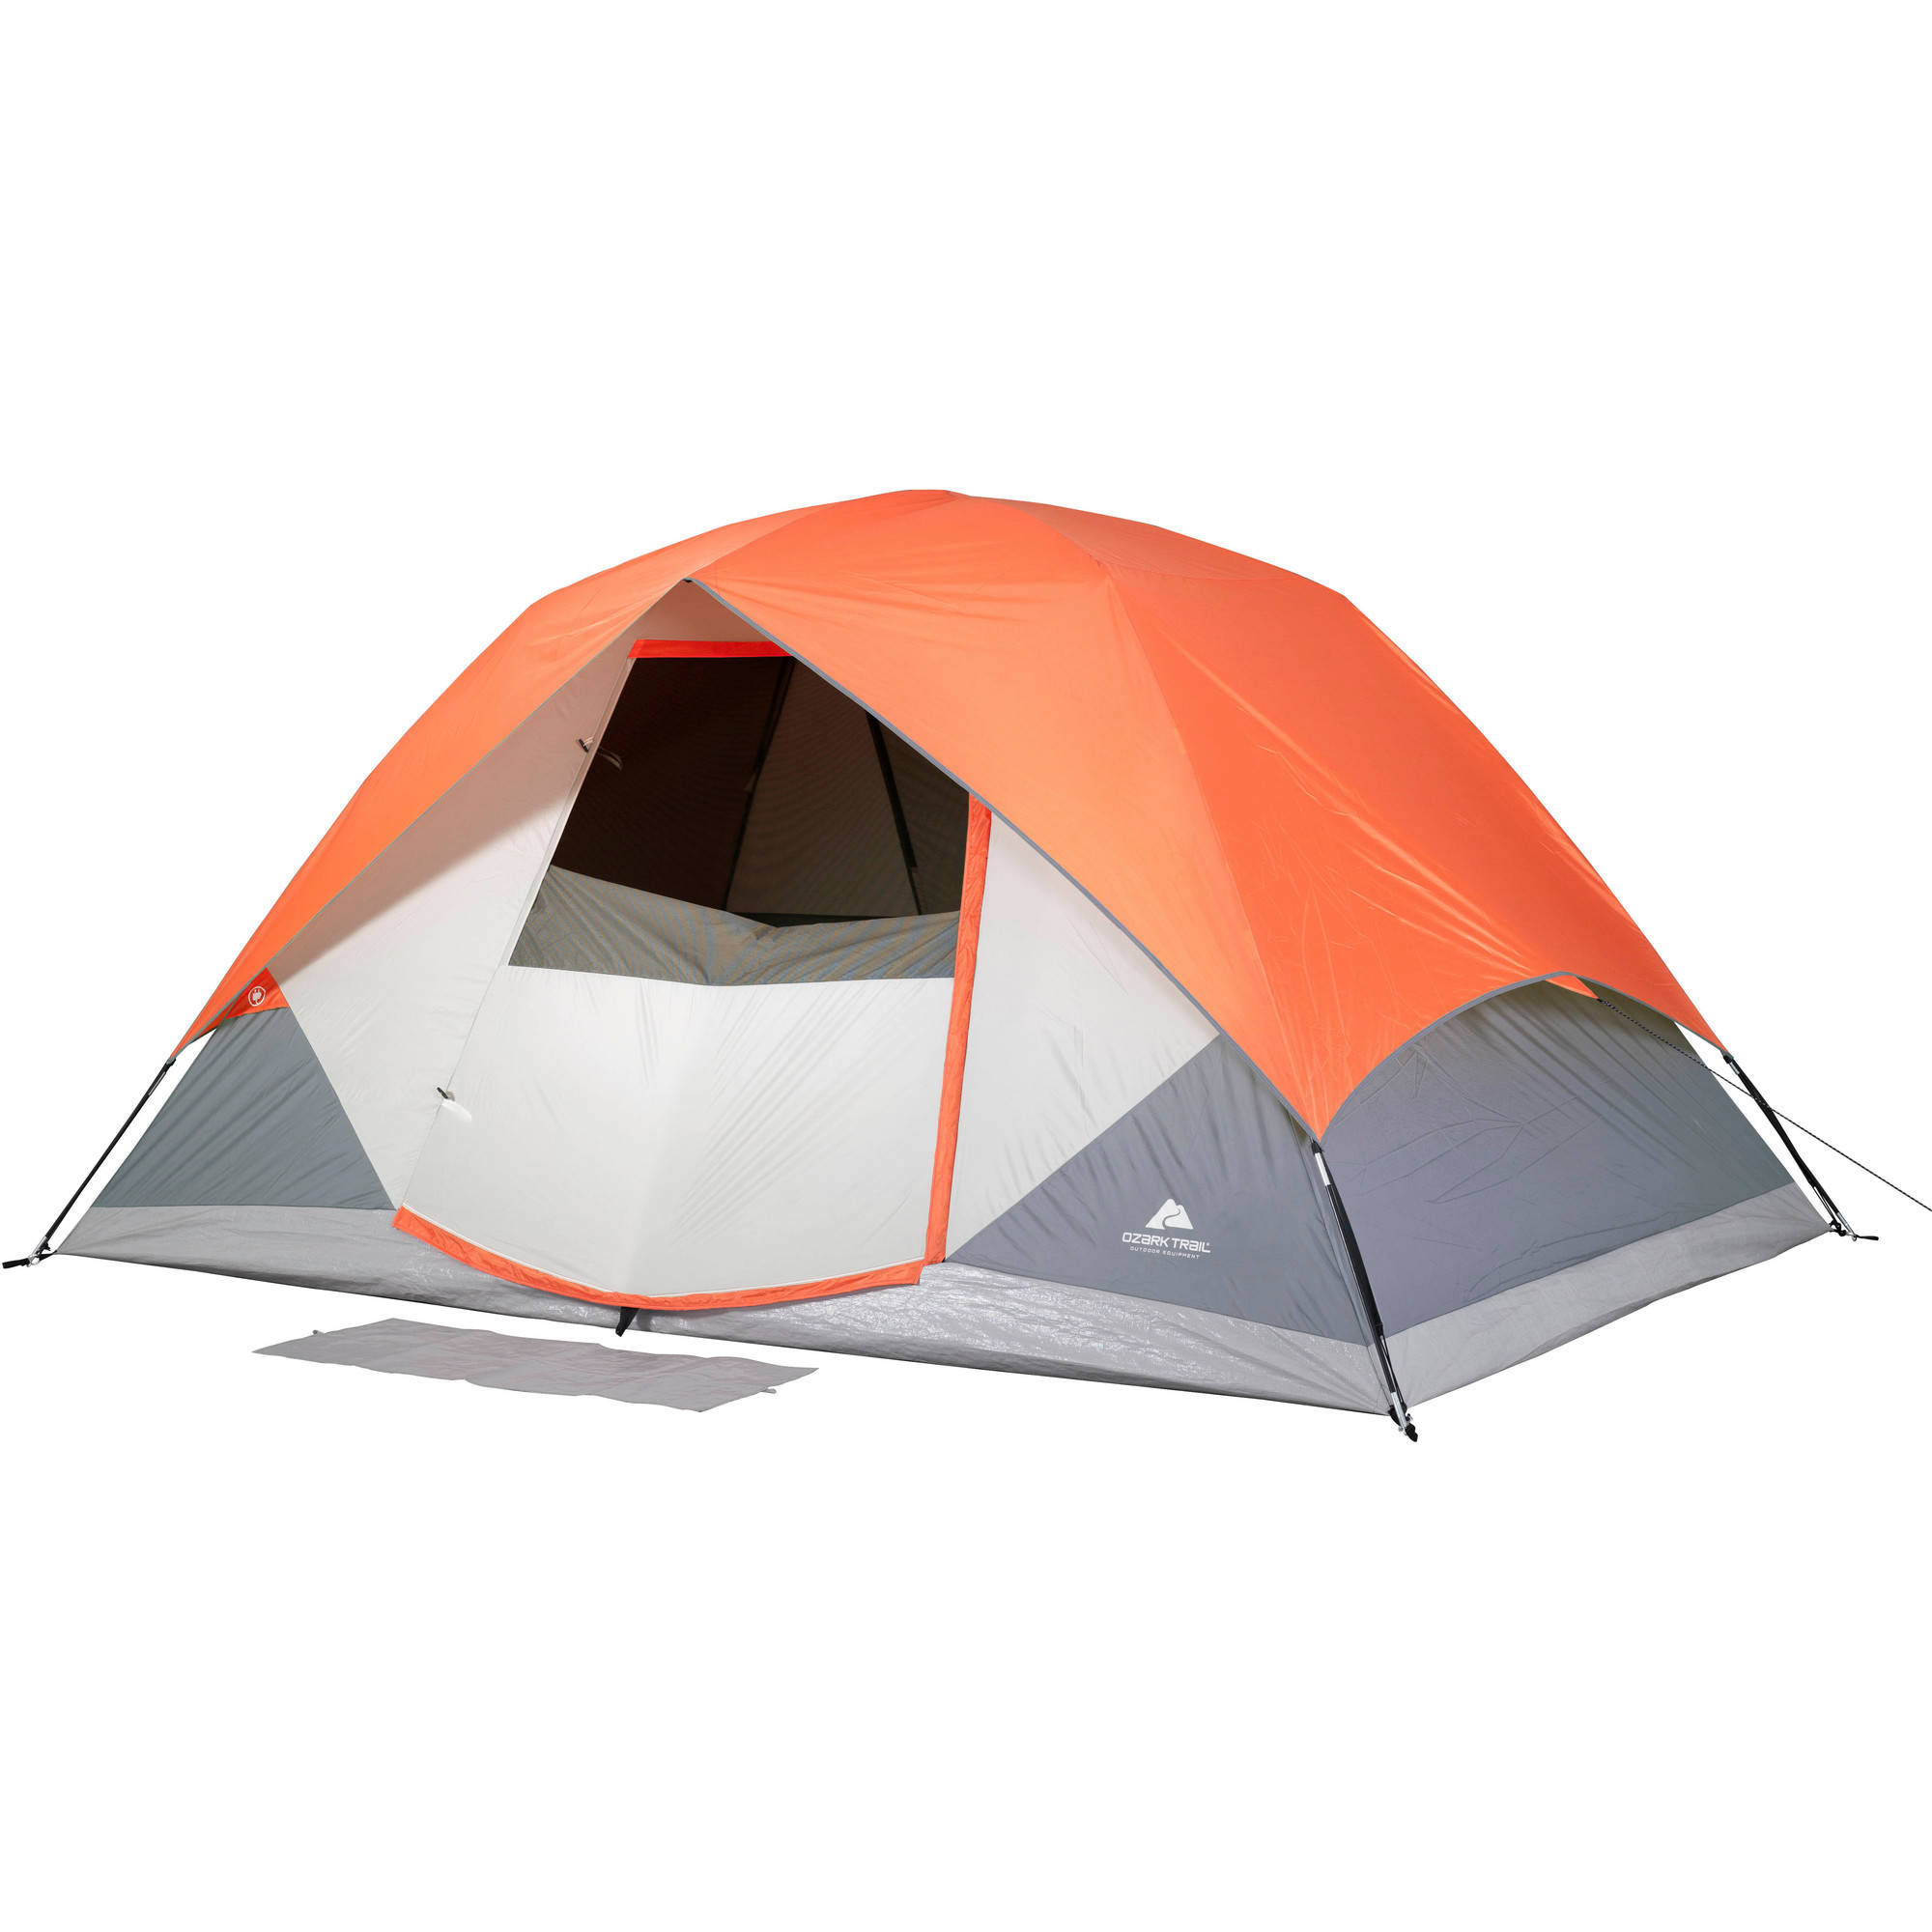 Ozark Trail 12' x 8' Dome Camping Tent with Roll Fly Back, Sleeps 6 - image 1 of 7